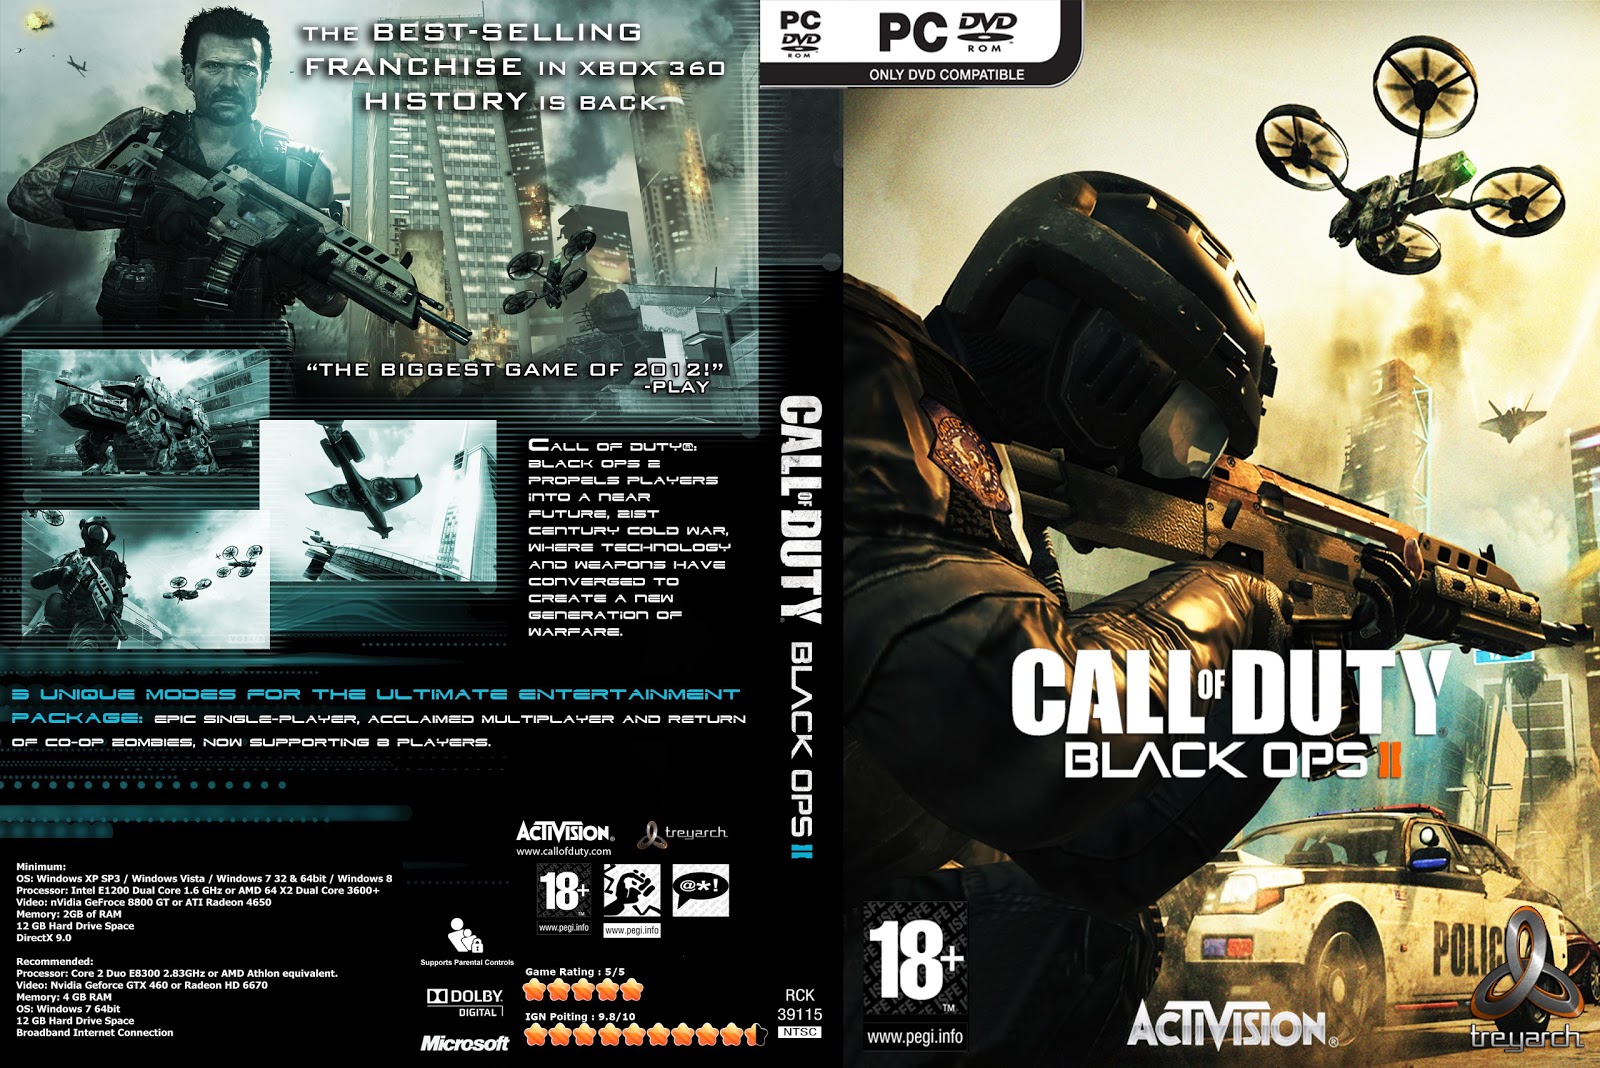 Call of duty black ops 2 free download torrent